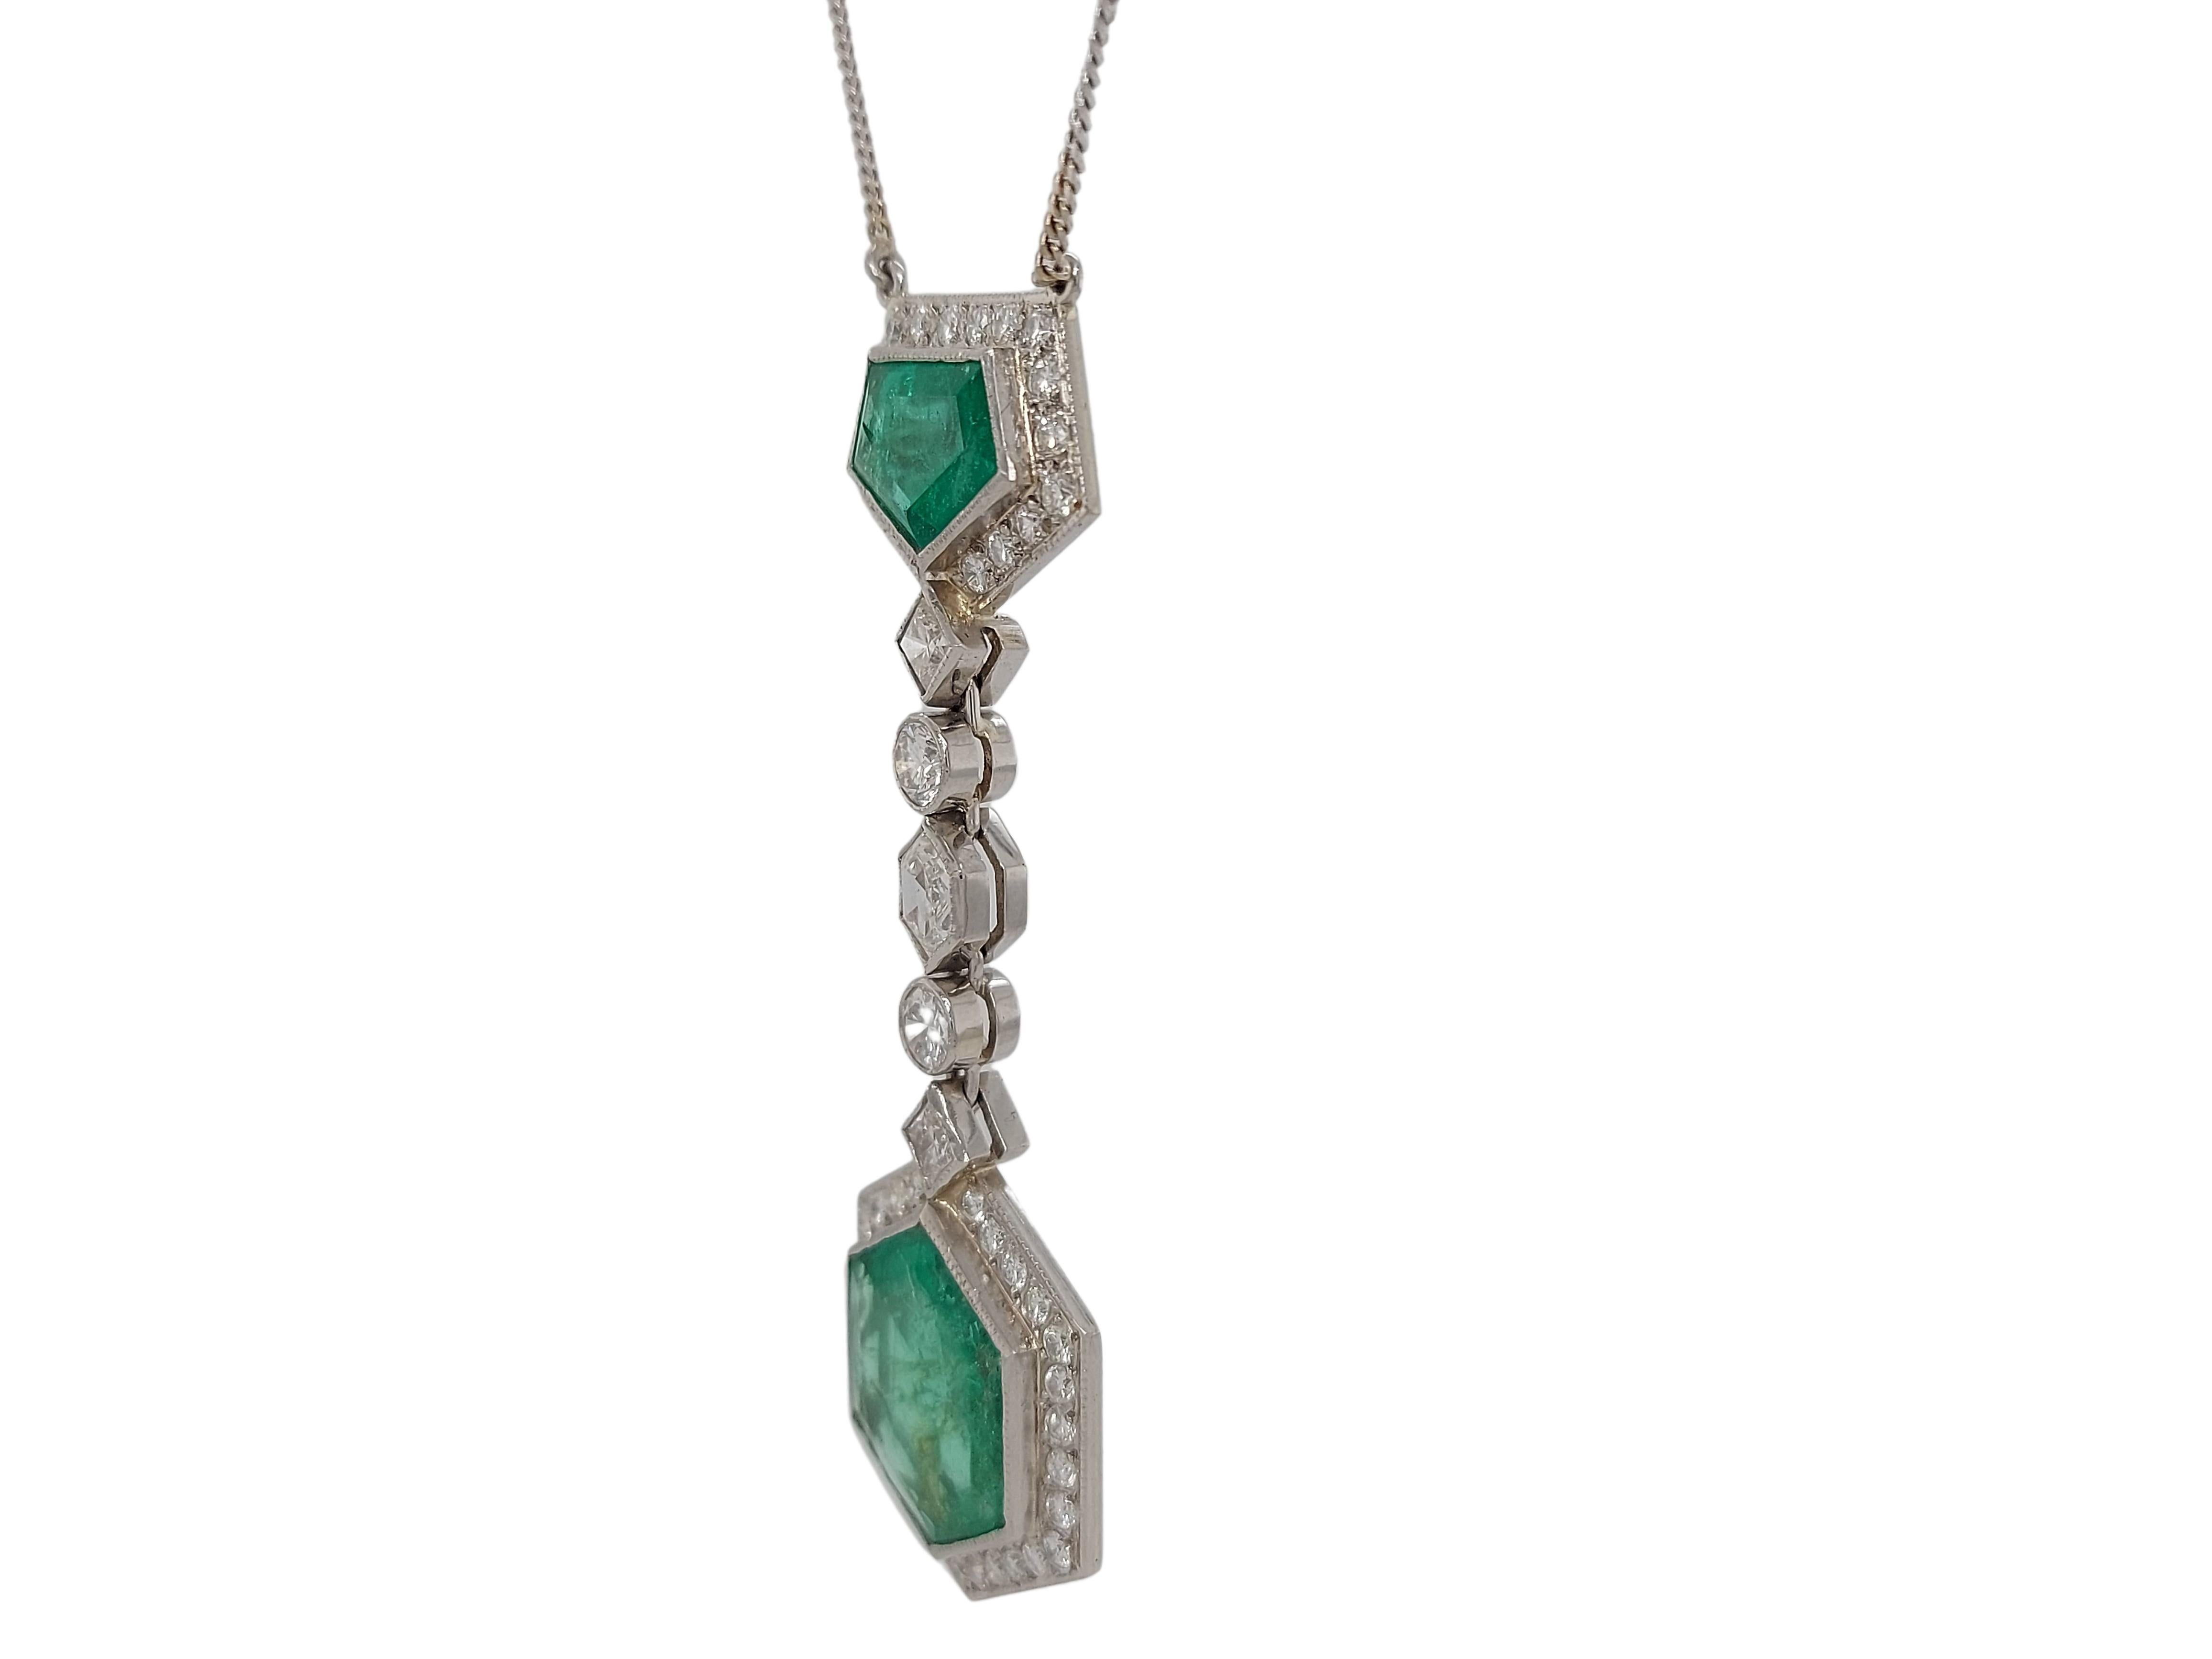 Hexagon Cut Necklace with 5.5 Carat Colombia Minor Emerald and Diamonds, CGL Certificate For Sale